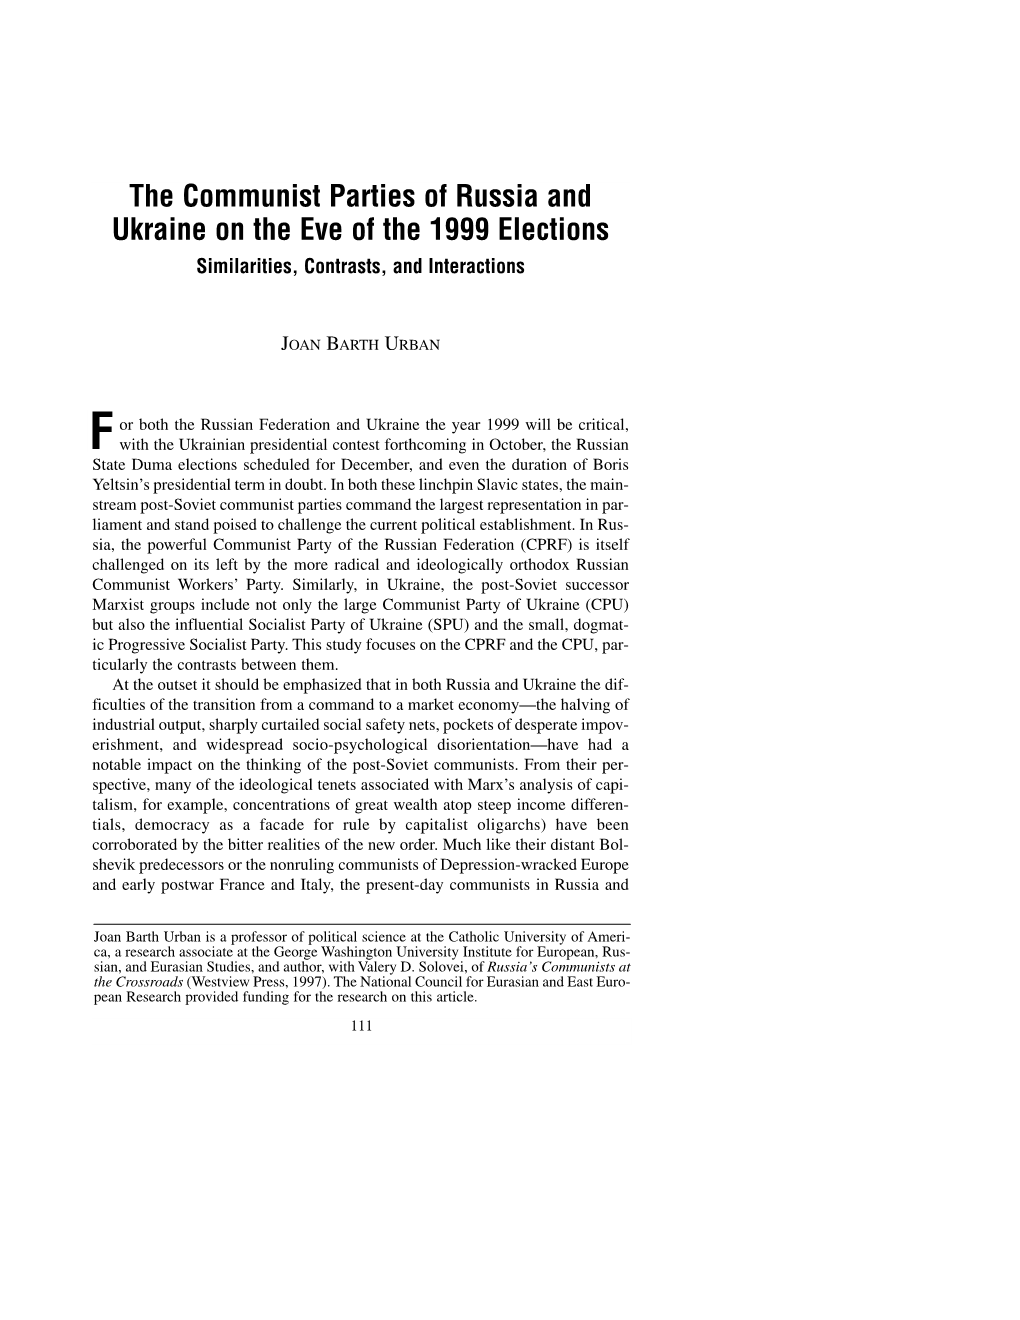 The Communist Parties of Russia and Ukraine on the Eve of the 1999 Elections Similarities, Contrasts, and Interactions